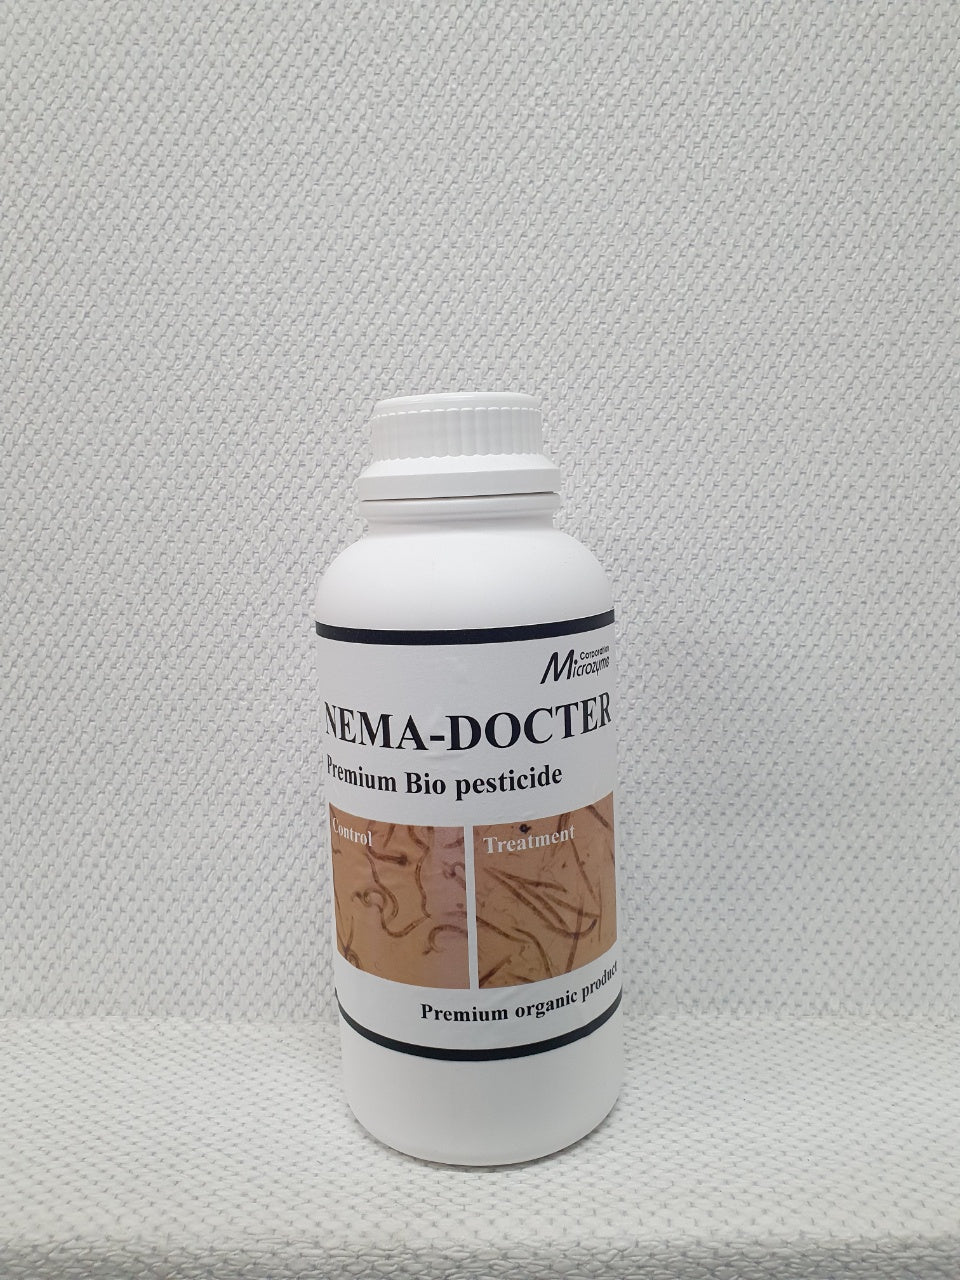 Nemadocter Biopesticide  product for nematode control 1L  Light brown microbial cultures | Type and content of raw materials : 100% microbial extract